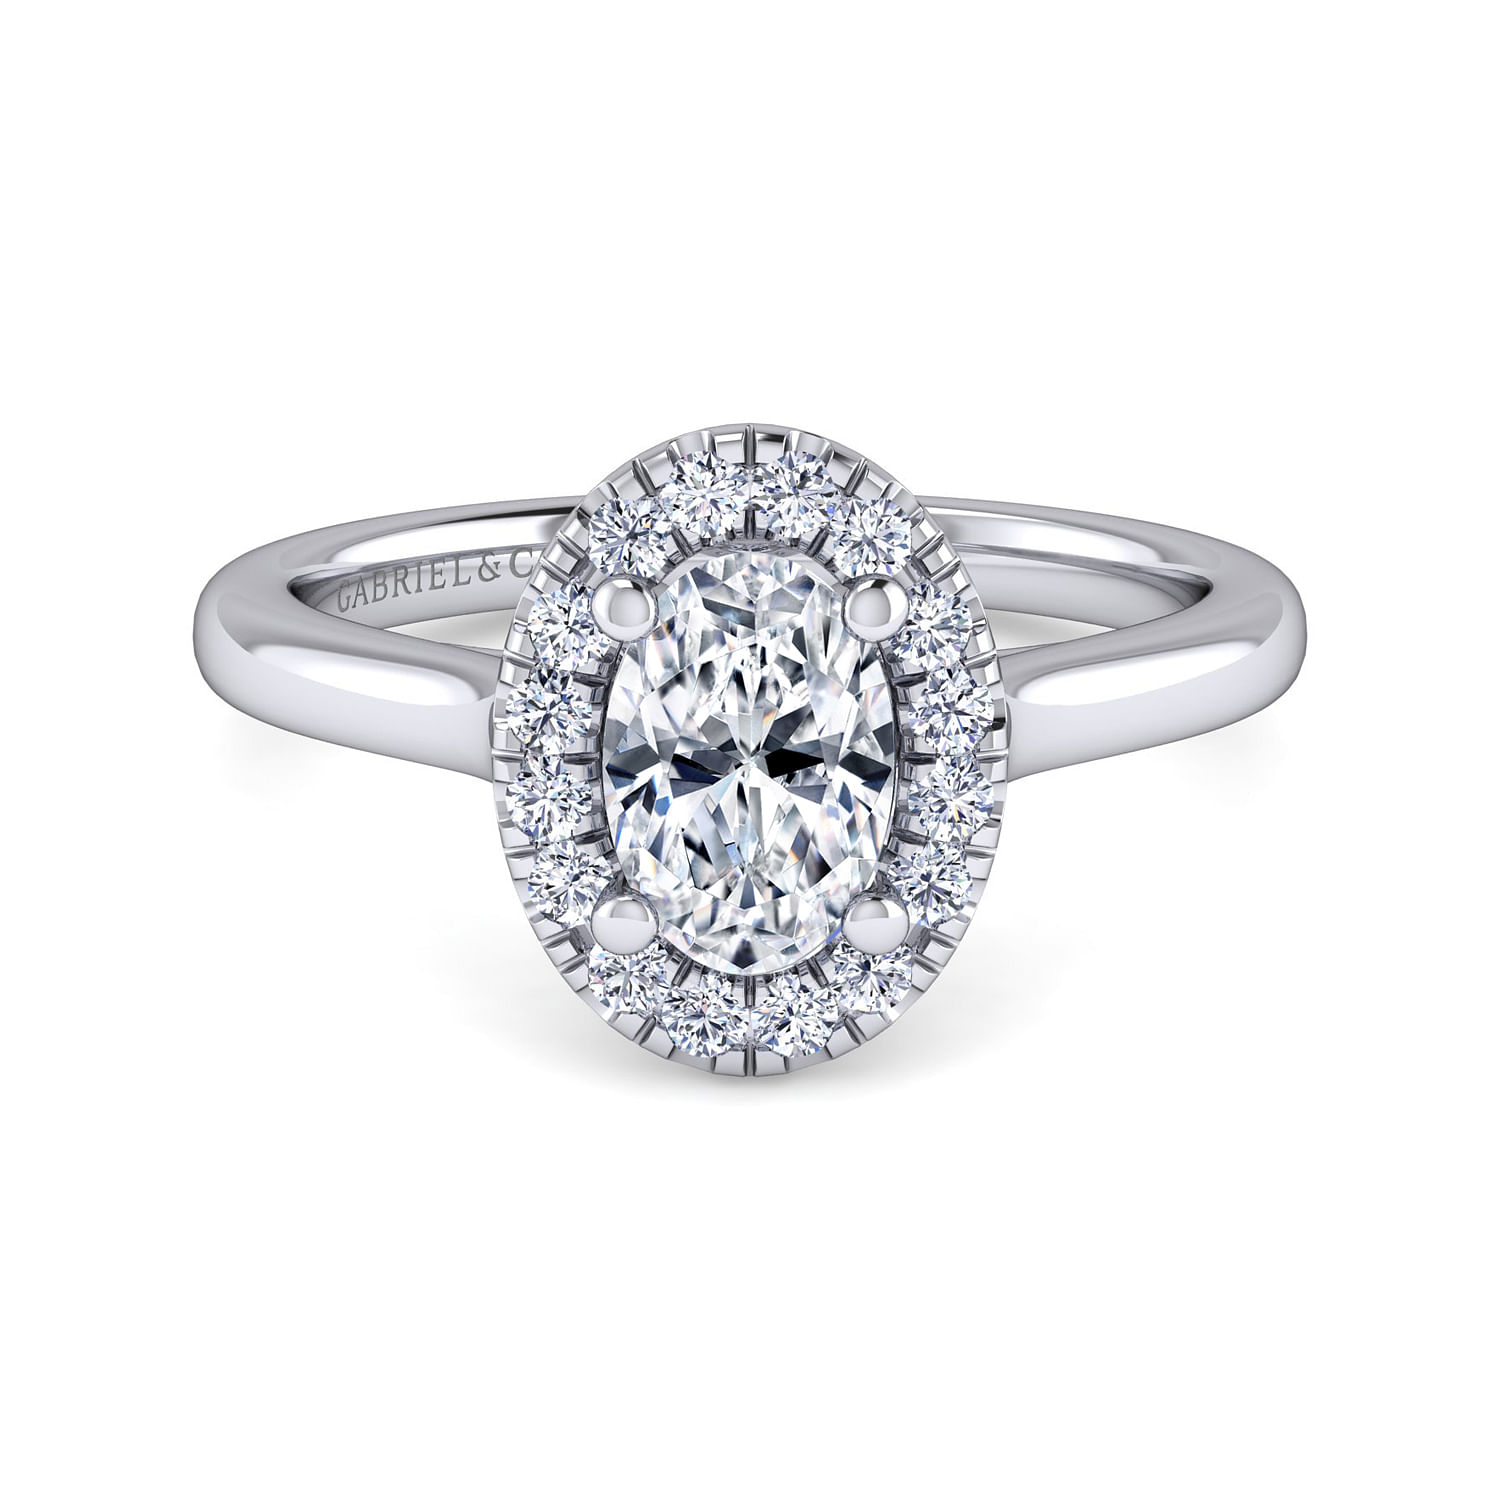 Stacy - 14K White Gold Oval Halo Diamond Engagement Ring